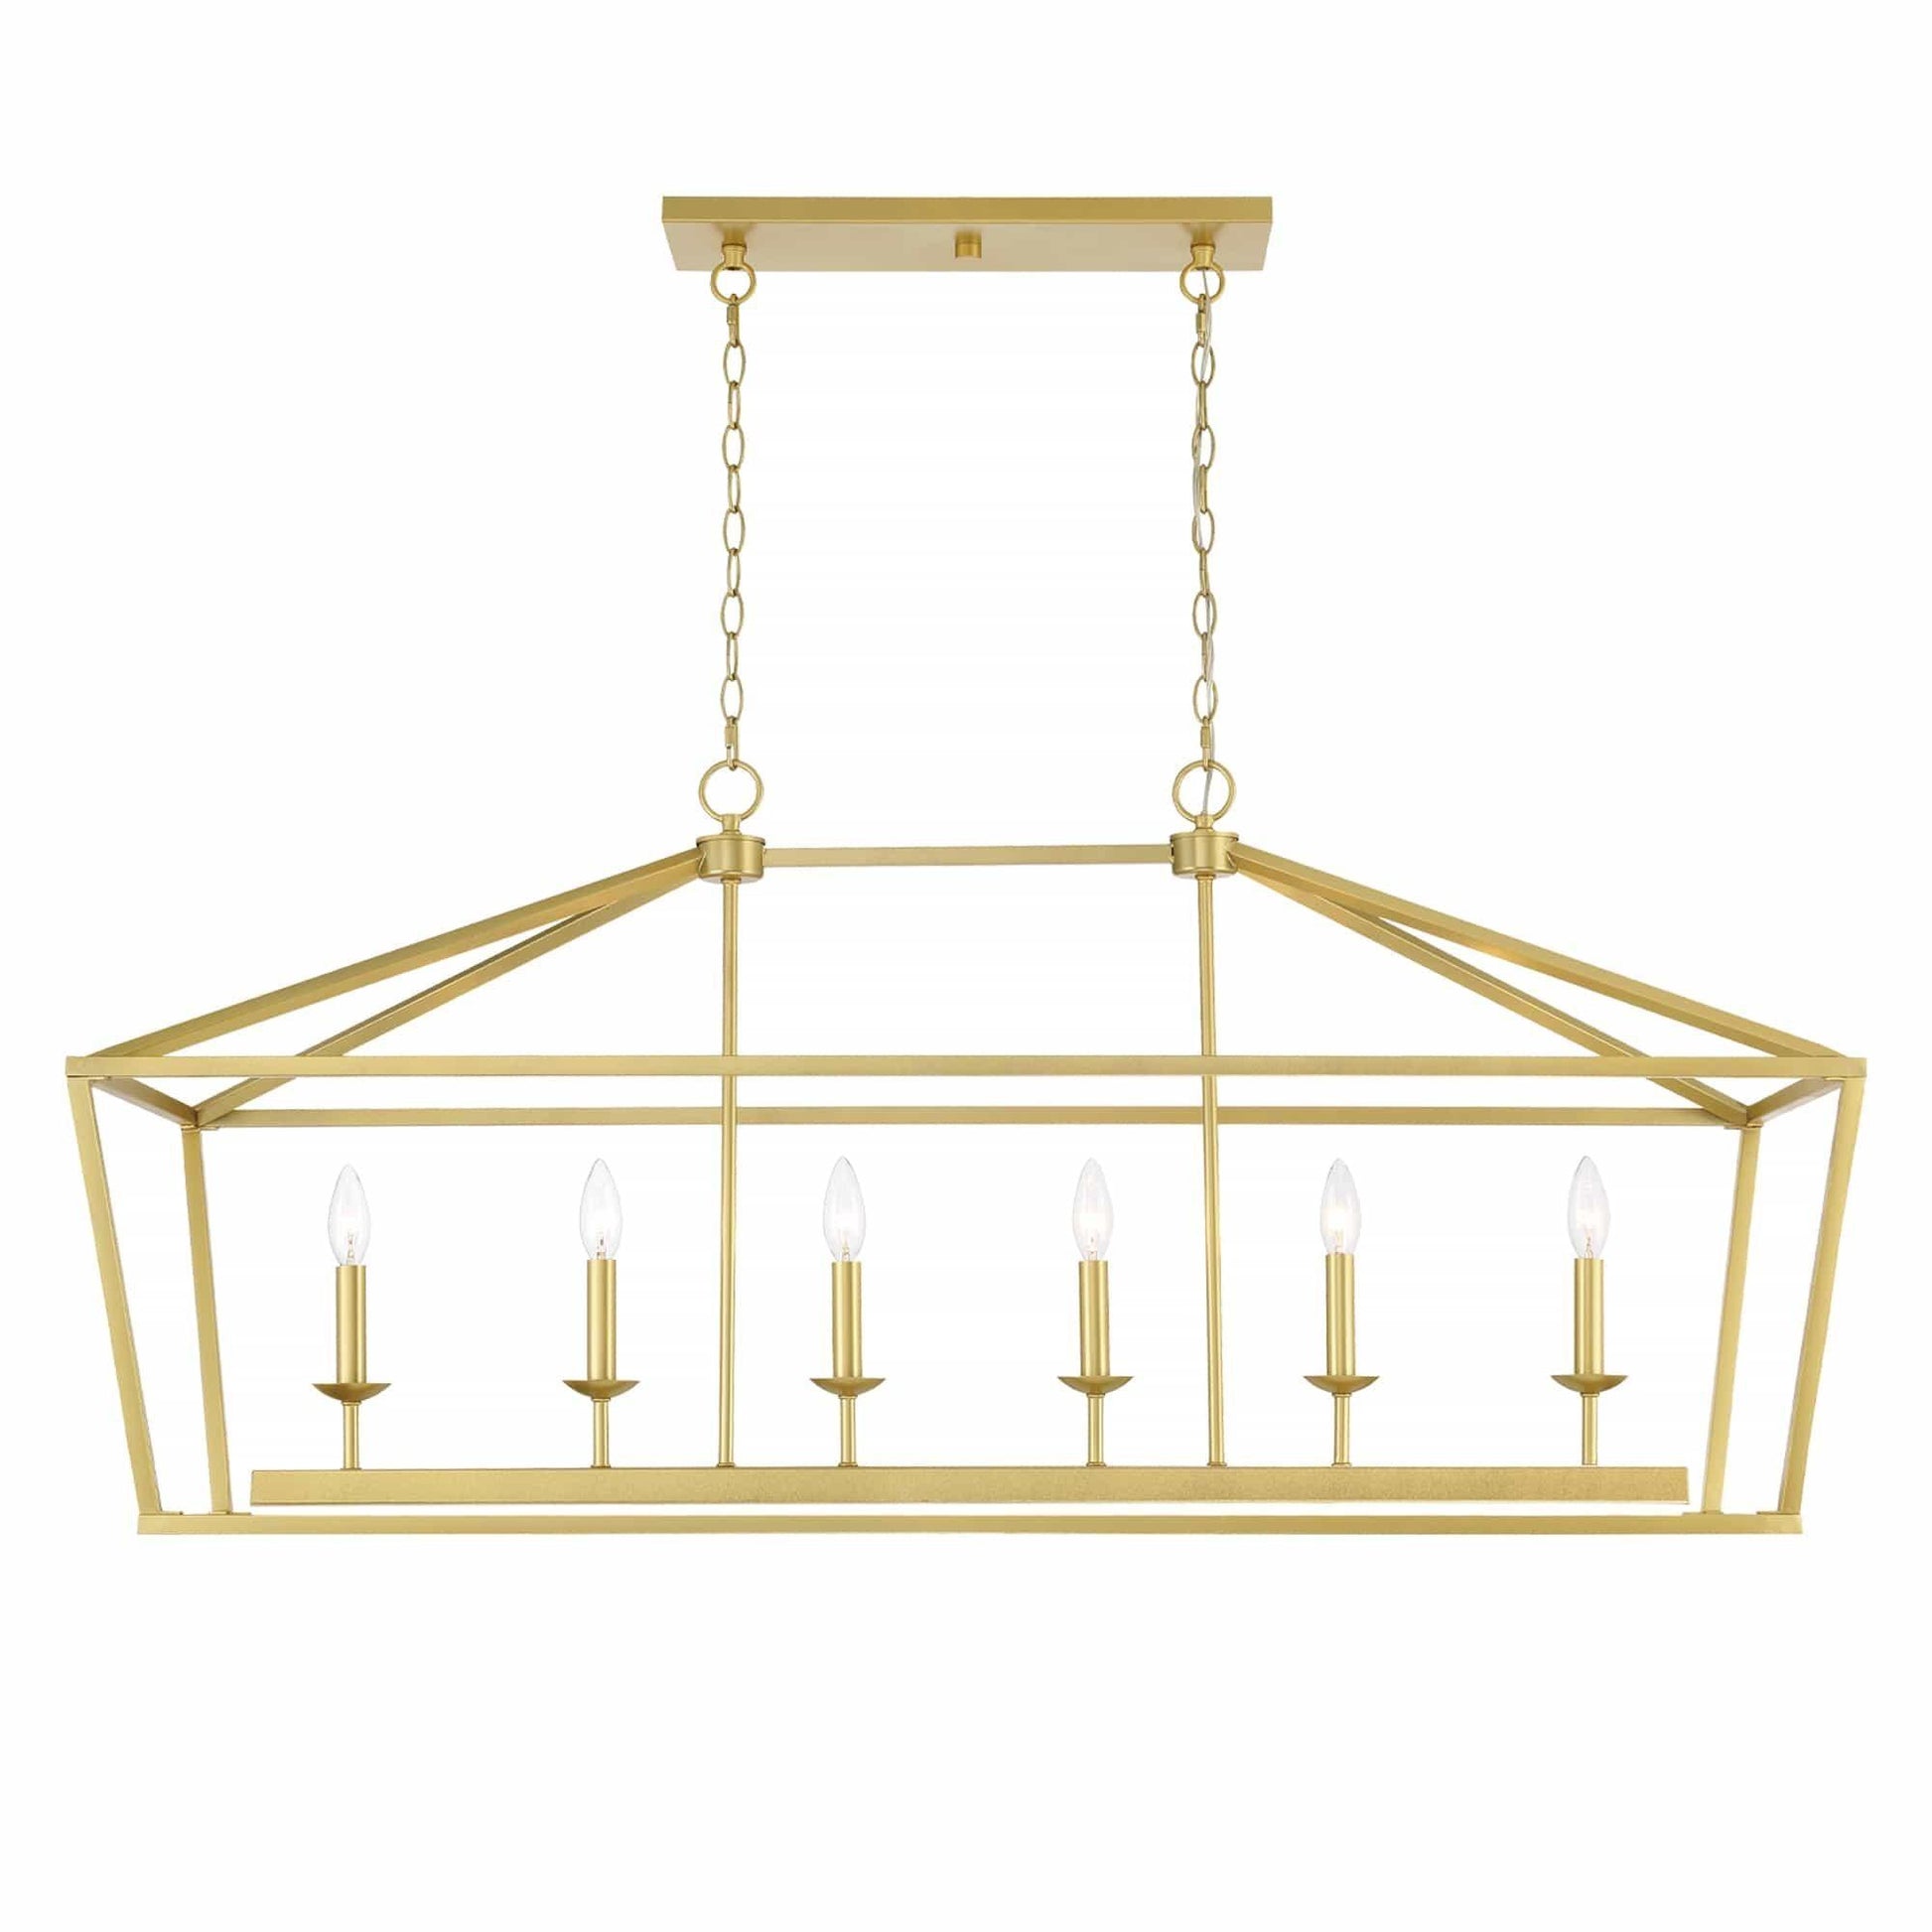 6 light linear kitchen island chandelier (9) by ACROMA